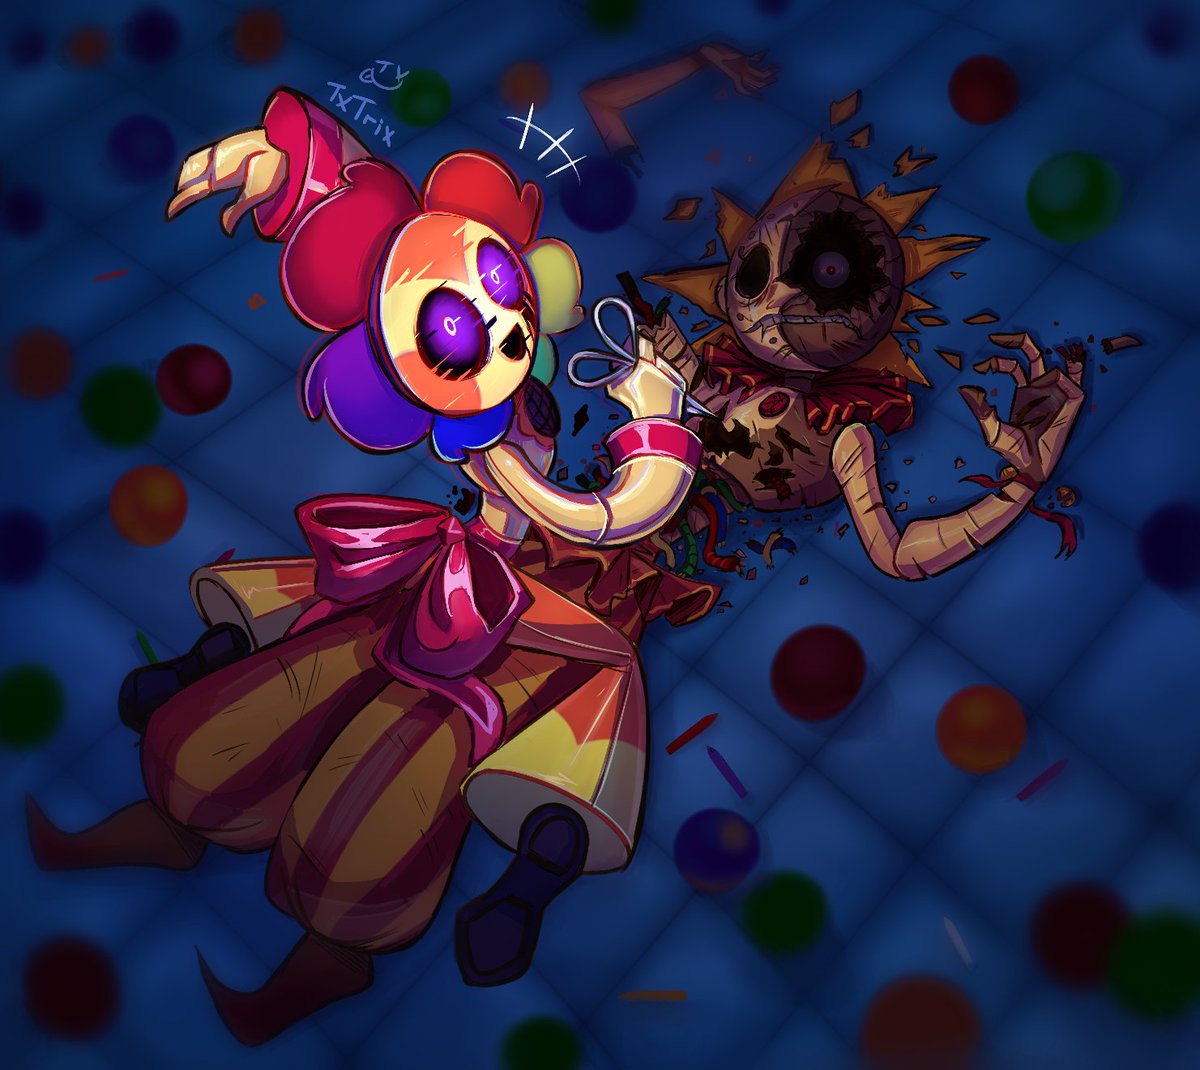 i had so much fun with this one
i also reallyyy love blommy fun little boi 
Bloomy belongs to the talented @lisa77494 
#fnaf #fnafsecuritybreach #sundrop #sundropfnaf #FNAF  #Fanart #originalcharacter